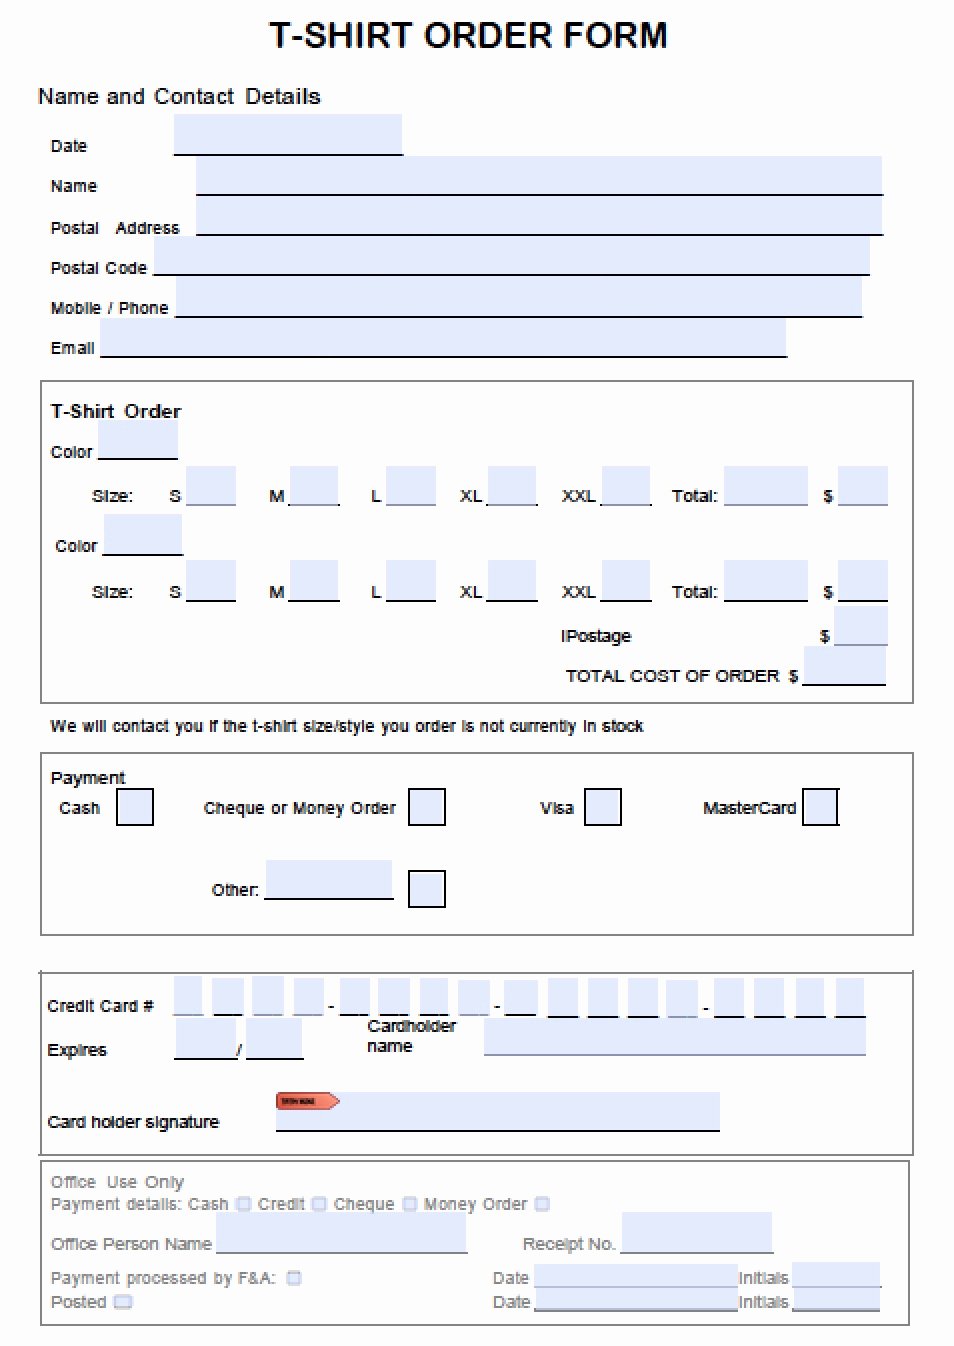 Clothing order form Template Inspirational T Shirt order form Template